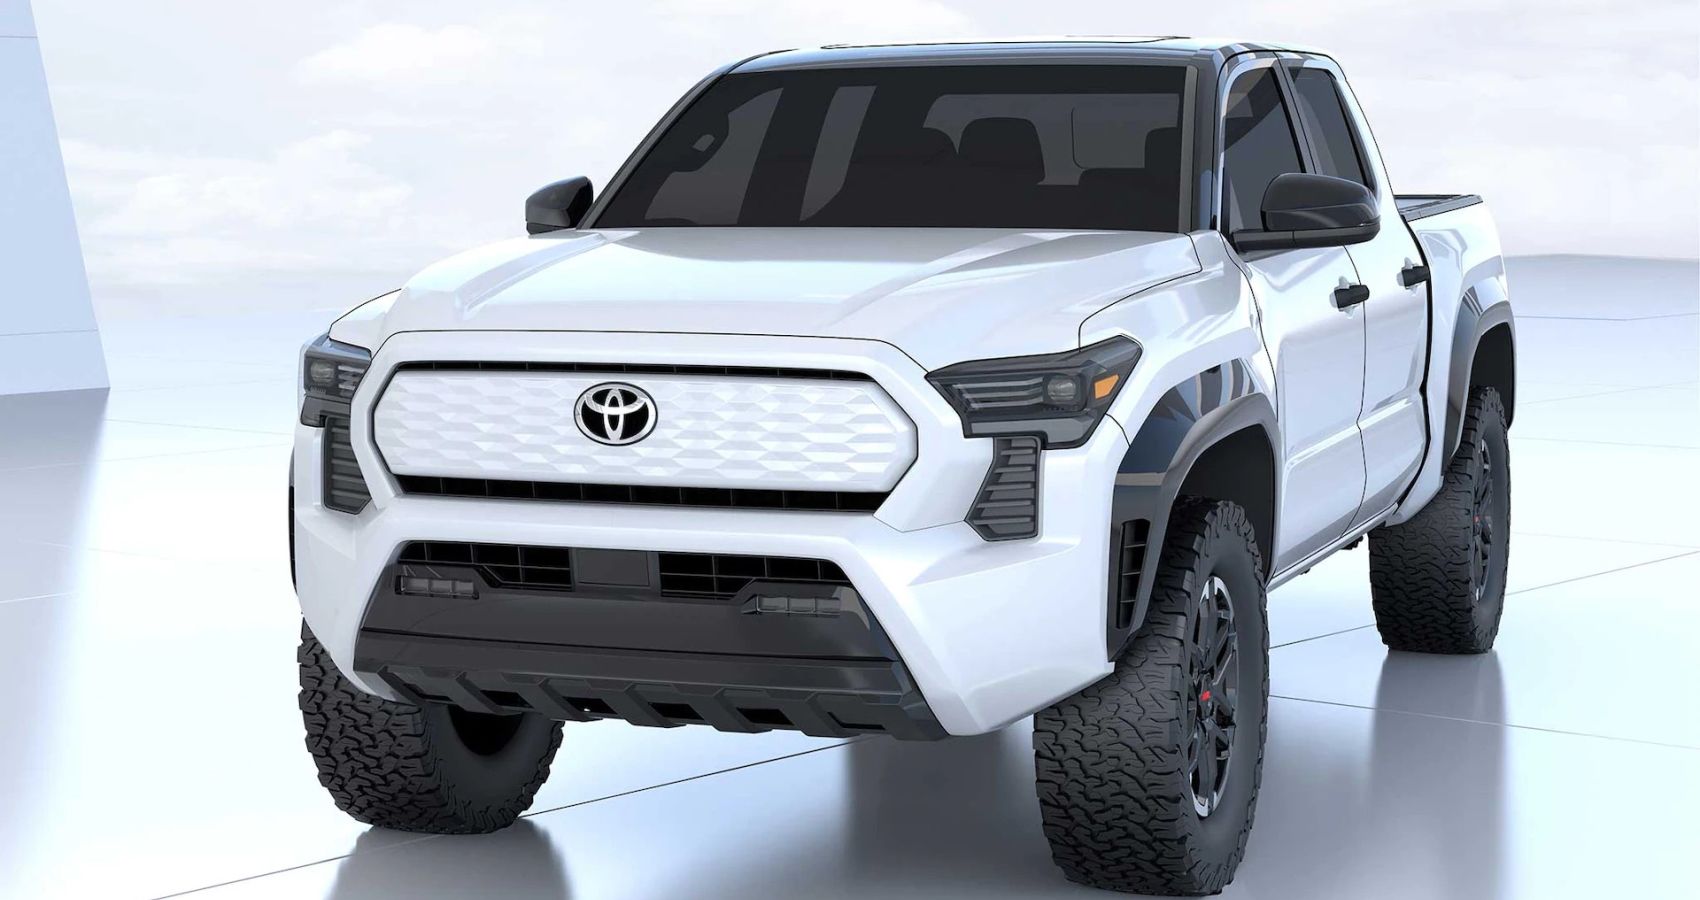 2024 Toyota Tacoma EV Concept In CGI Render From Toyota Presentation